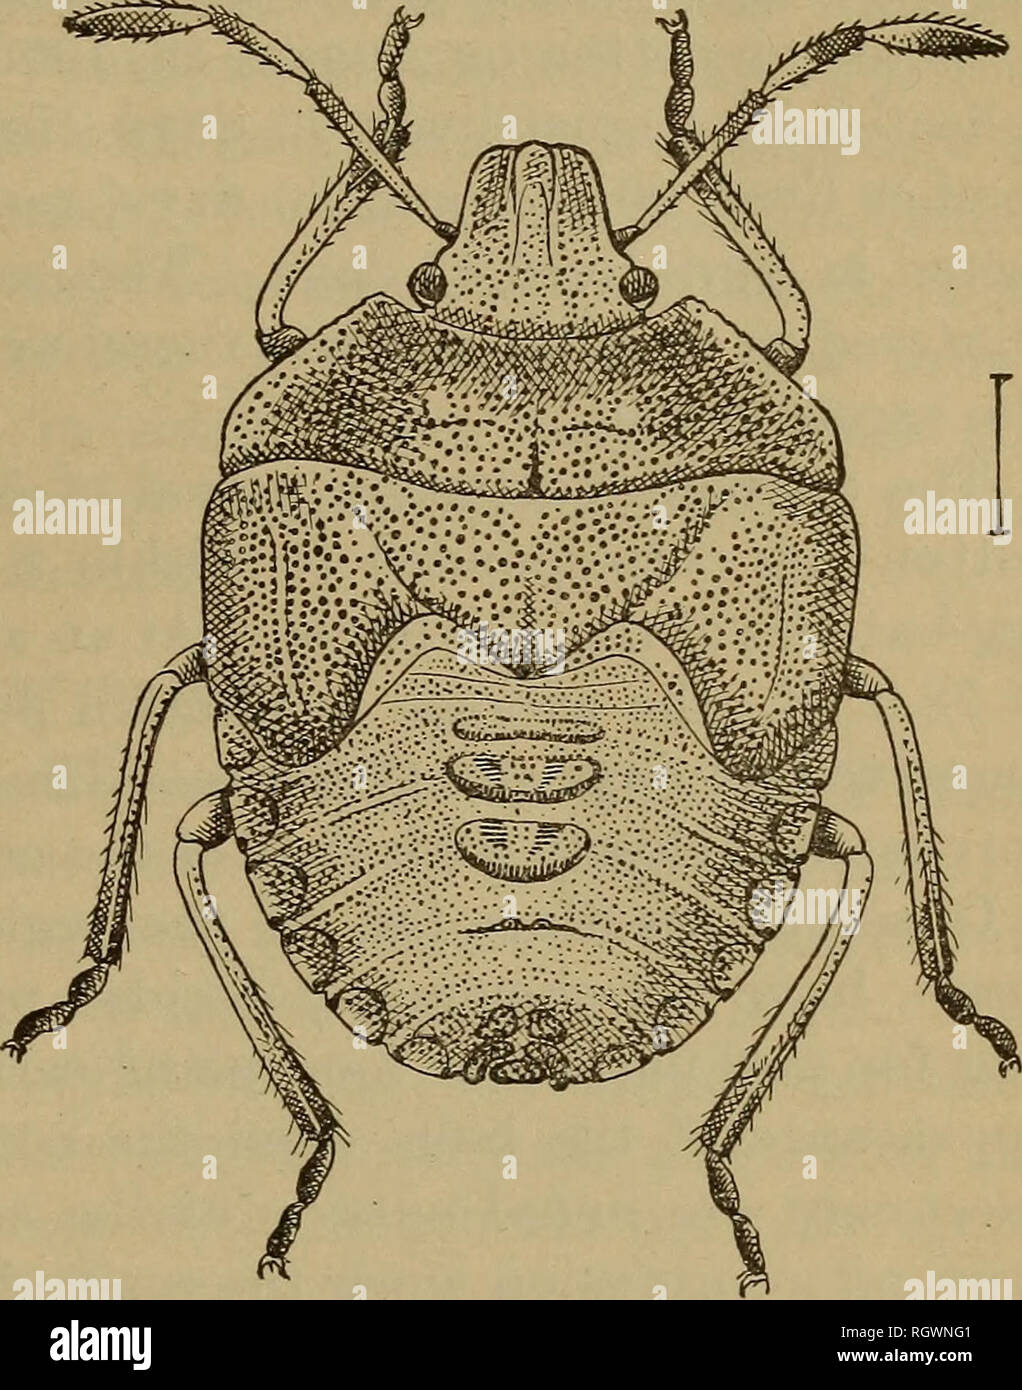 . Bulletin. Insects; Insect pests; Entomology; Insects; Insect pests; Entomology. PENTATOMID BUGS OF THE GENUS EUSCHISTUS. 75 THE BROWN COTTON-BUG. (Euschistus servus Say.) DISTRIBUTION. Dr. p. K. Uhler states&quot; that Euschistus servus (PI. I, fig. 2; text figs. 12, 13) inhabits Texas, New Mexico, Cahfornia, ''Dakota,&quot; Ilhnois, Maryland, and the Southern States generally. Mr. E. P. Van Duzee, who possesses the most extensive collection of the Penta- toniidse of America, states ^ that he has not seen types of this species from north of New Jersey and Ohio or west of Kansas, Texas, and e Stock Photo